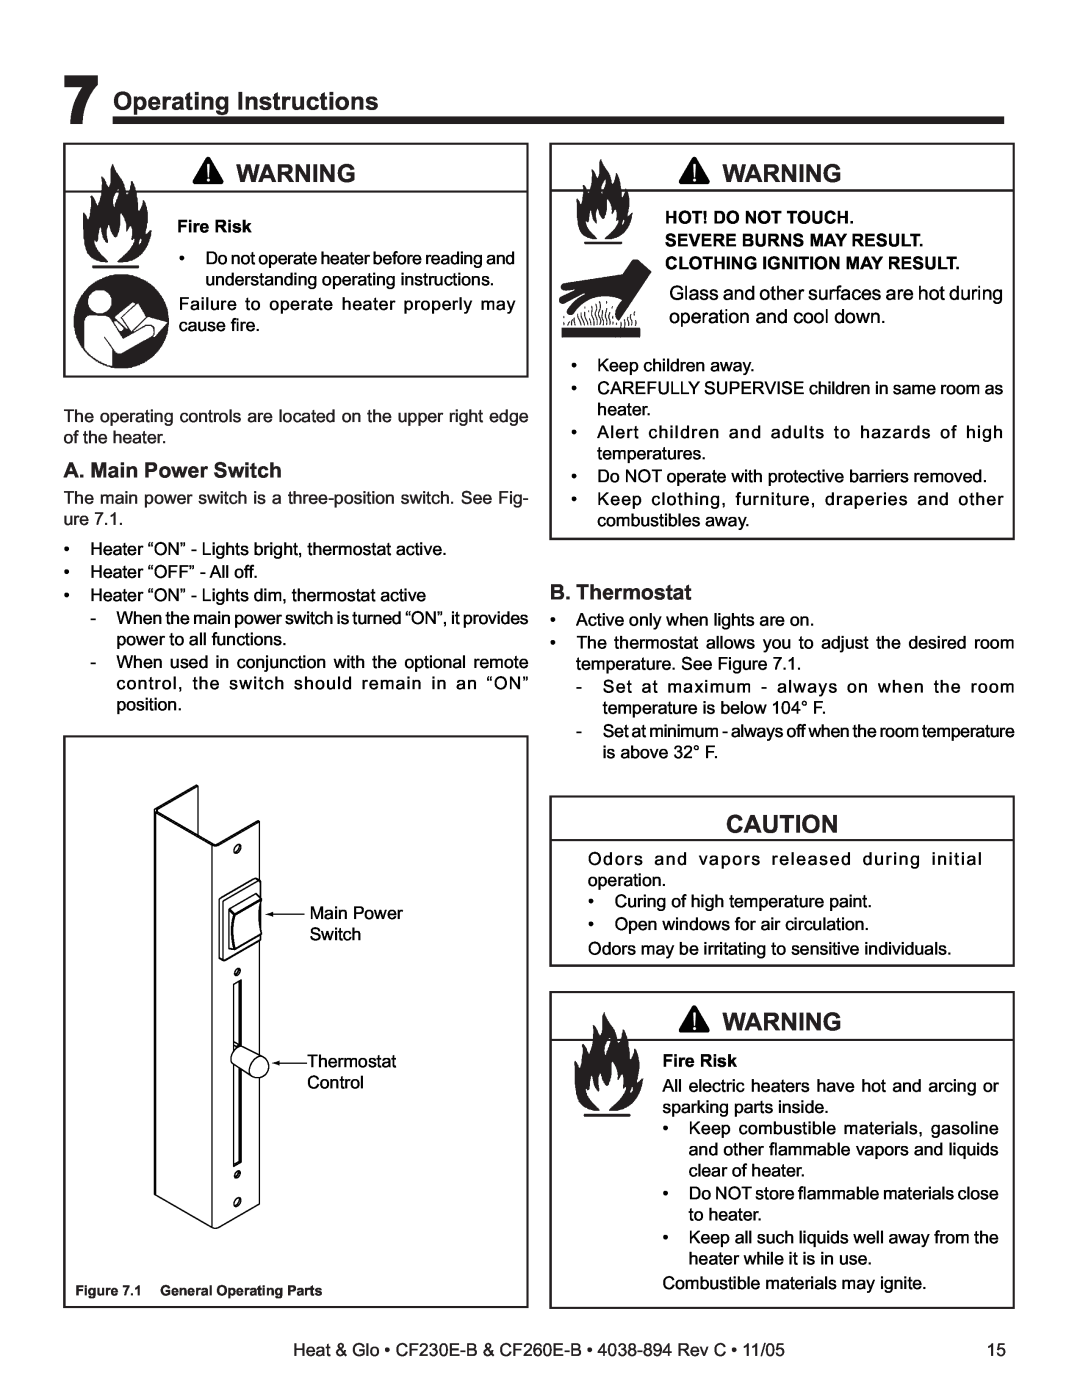 Satco Products CF260E-B Operating Instructions, A. Main Power Switch, B. Thermostat, operation and cool down, Fire Risk 